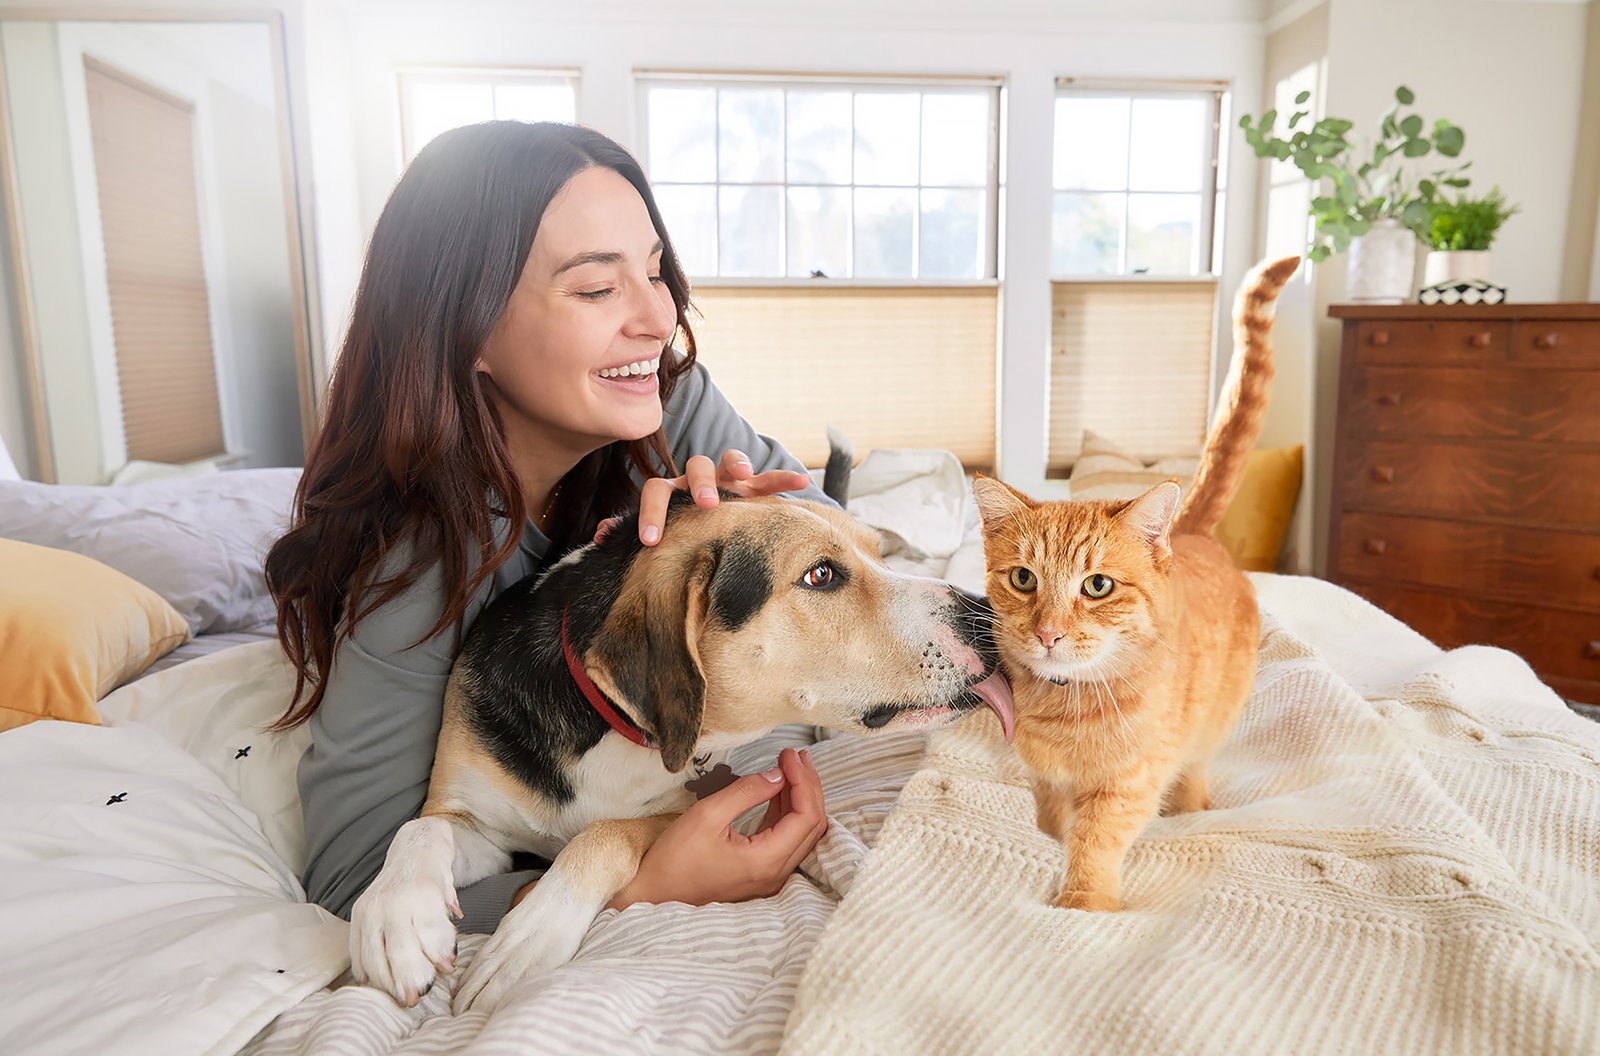 A woman with long dark hair is sitting on a bed, smiling and petting a beagle with her left hand. A ginger cat is walking on the bed near them. The bright room has large windows with blinds, a dresser, and a plant in the background.